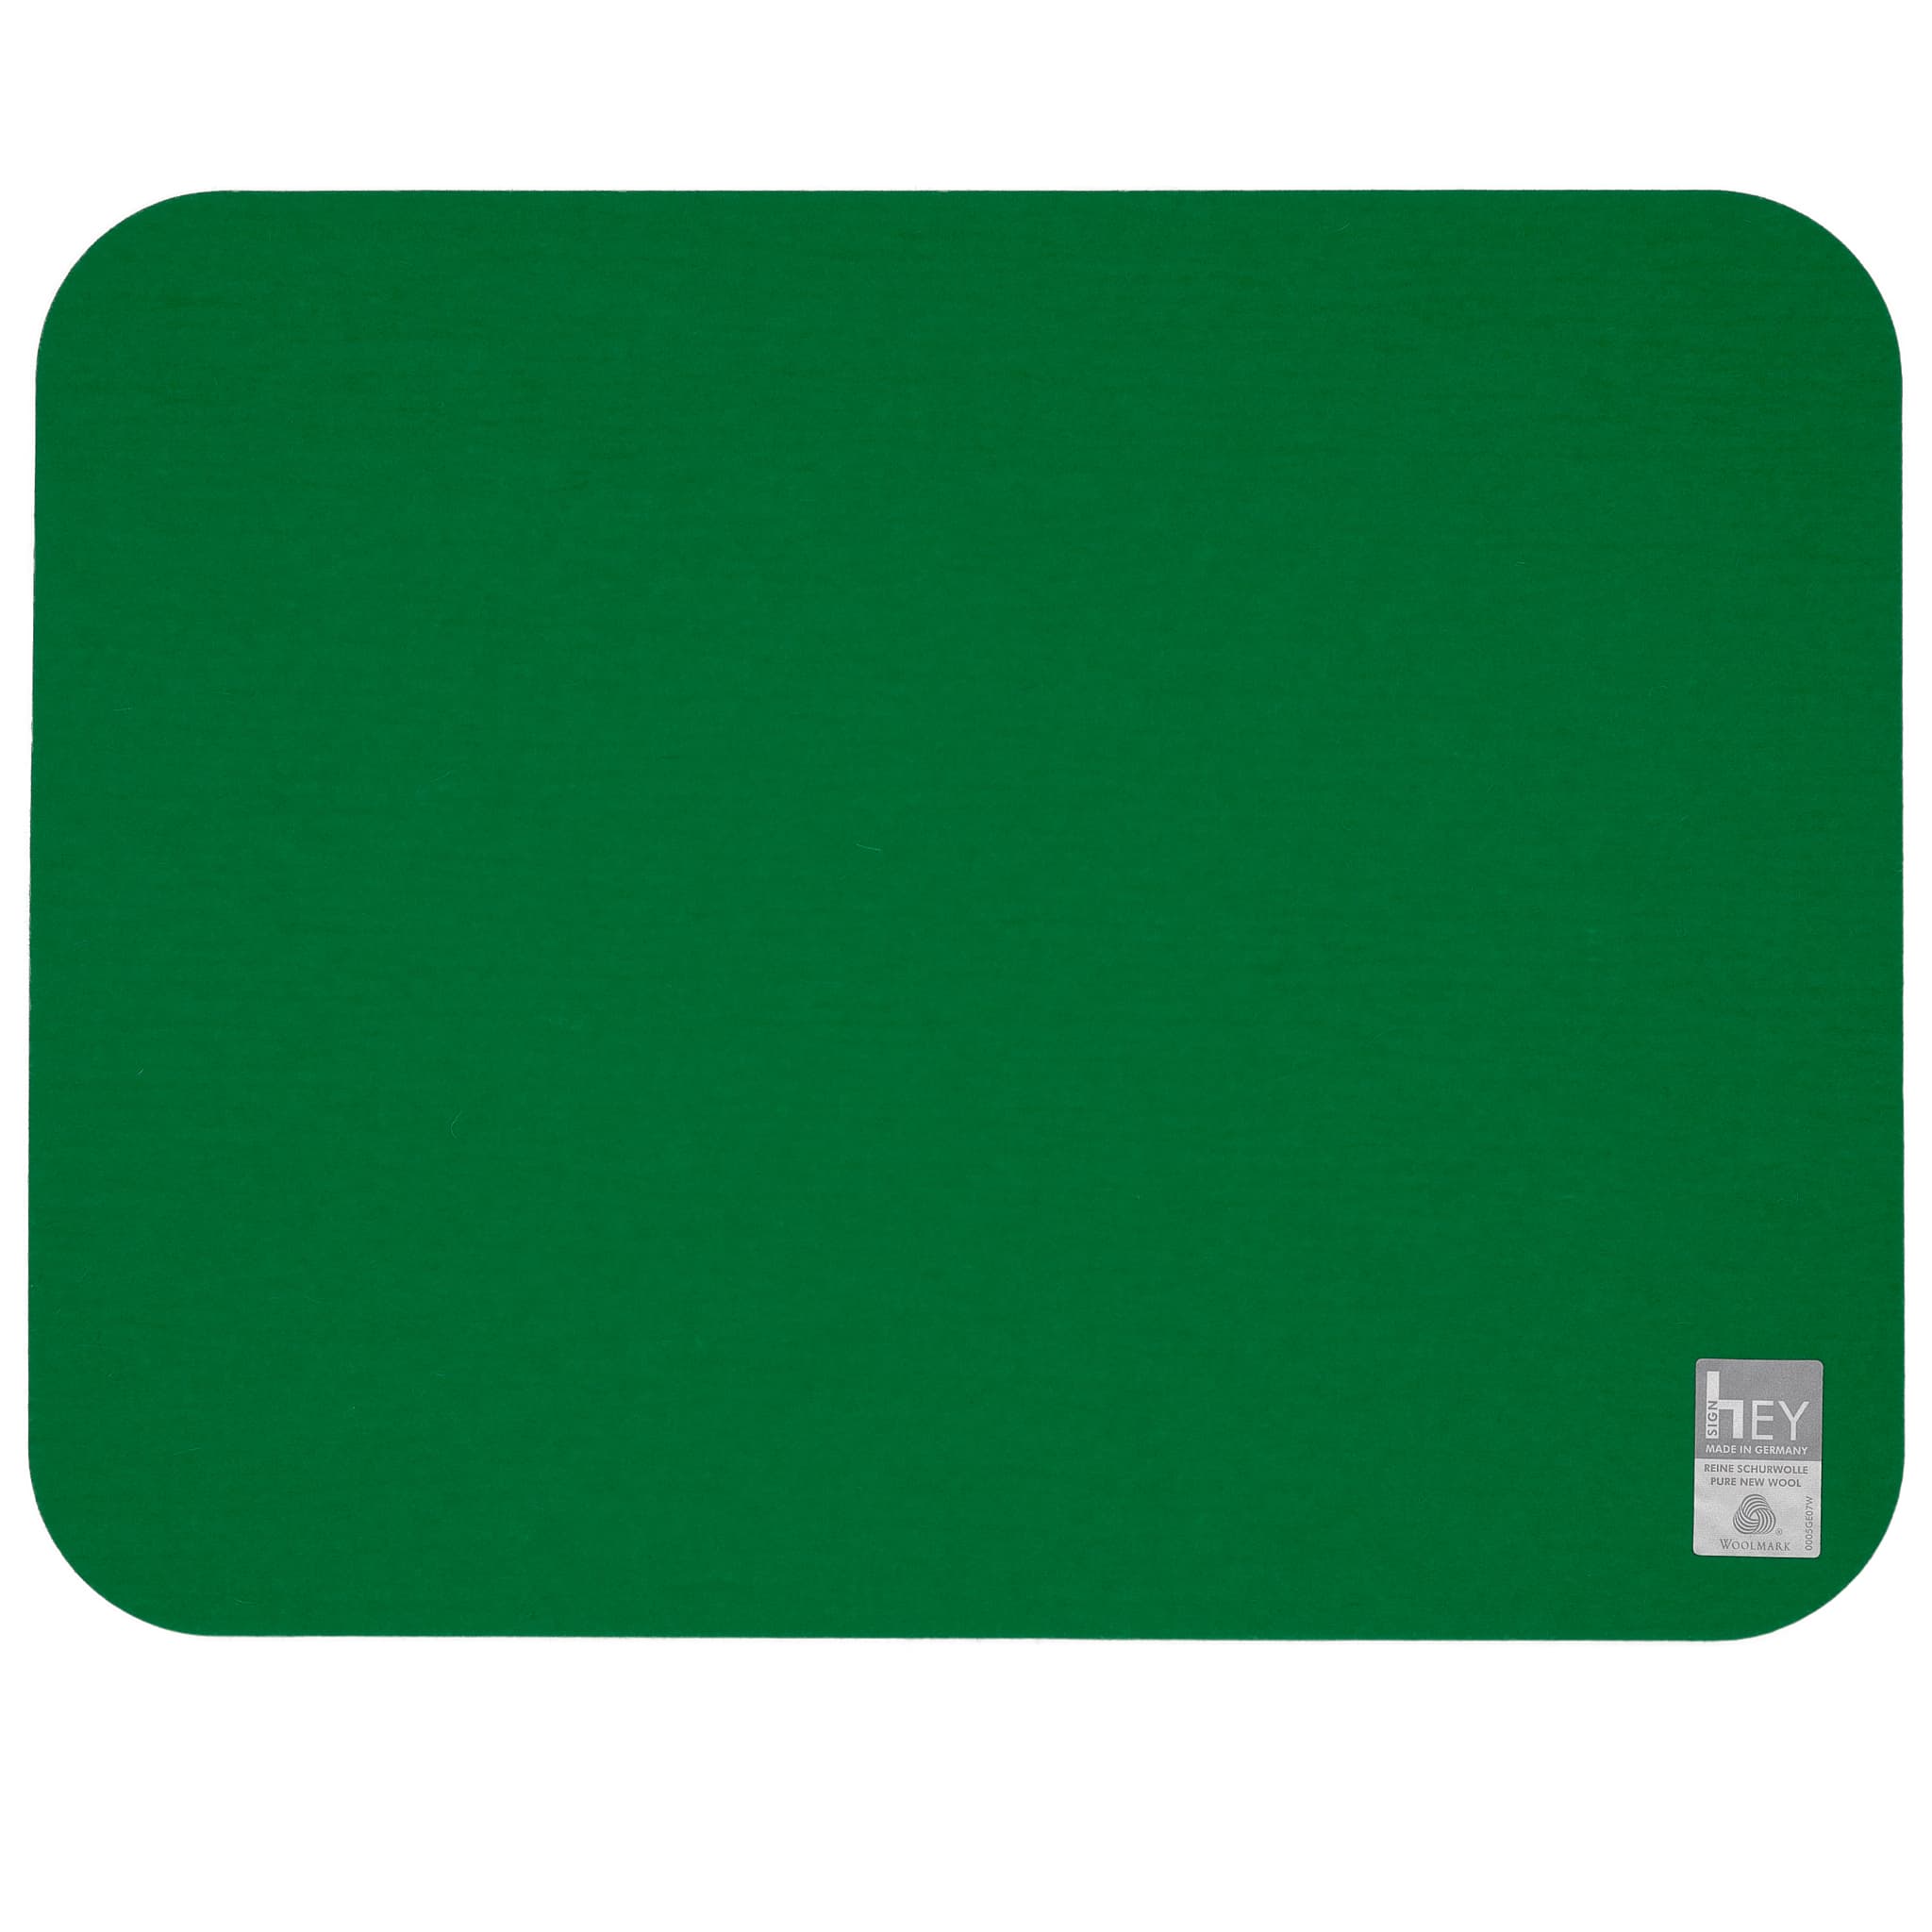 Rectangular Felt Placemat in Dark-Green by Hey-Sign 300134502 looking at Back